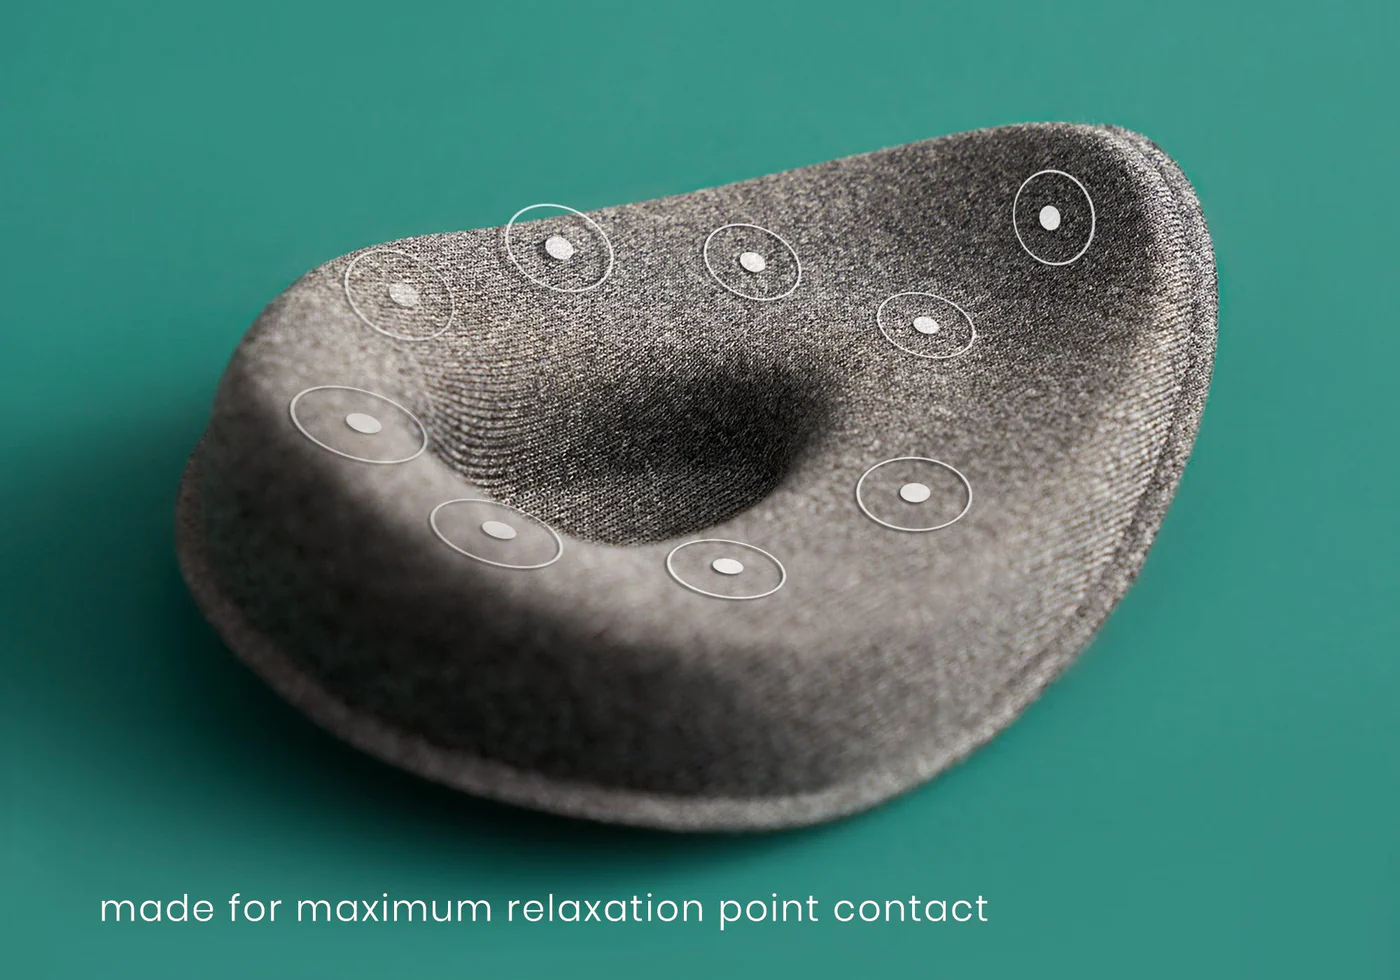 A tapered eye cup of a weighted sleep mask for side sleepers with white circles indicating the pressure points around the eyes.